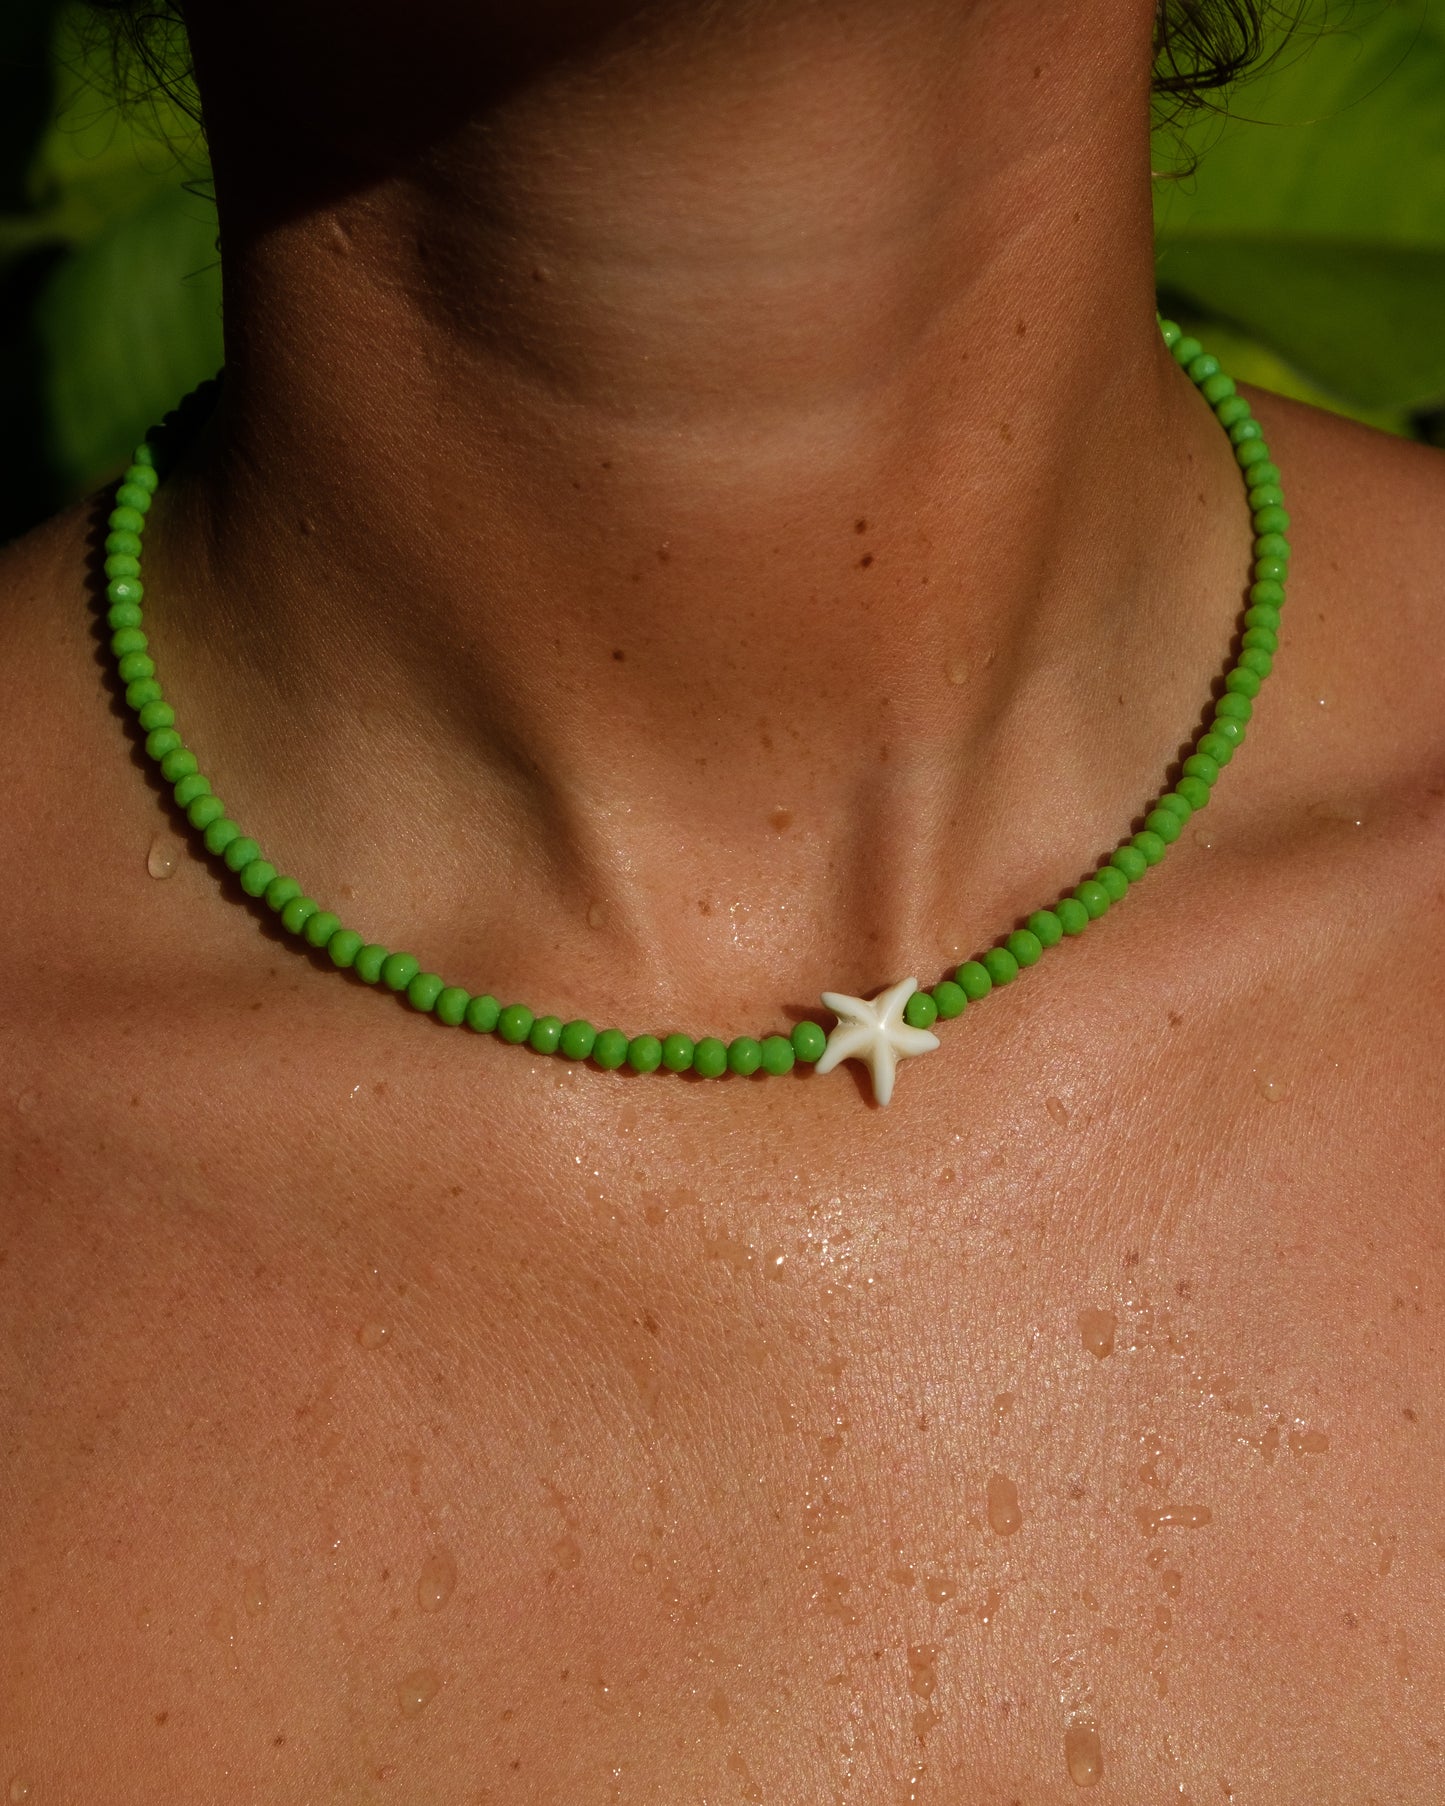 STARFISH NECKLACE - coming back soon